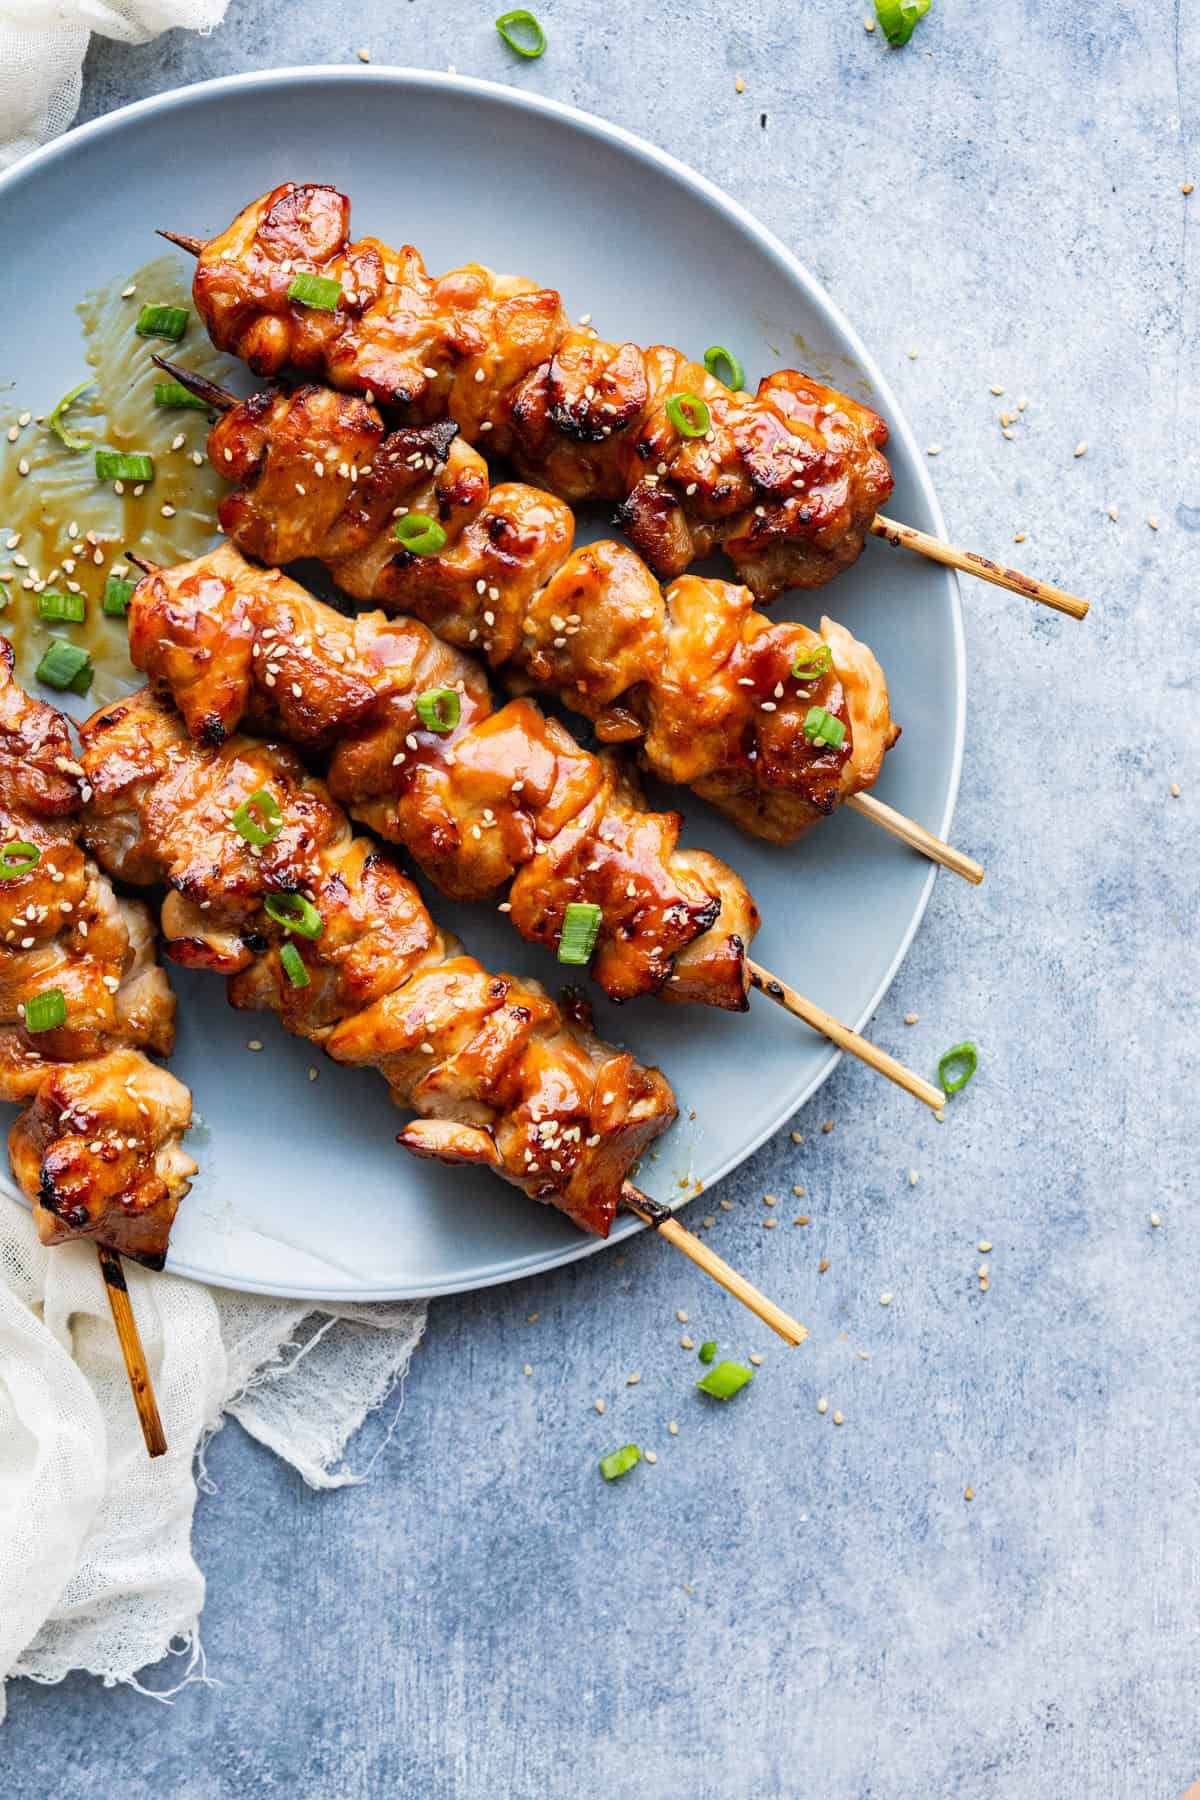 Teriyaki chicken skewers sprinkled with sesame seeds and green onion served on a plate and brushed with extra teriyaki sauce.